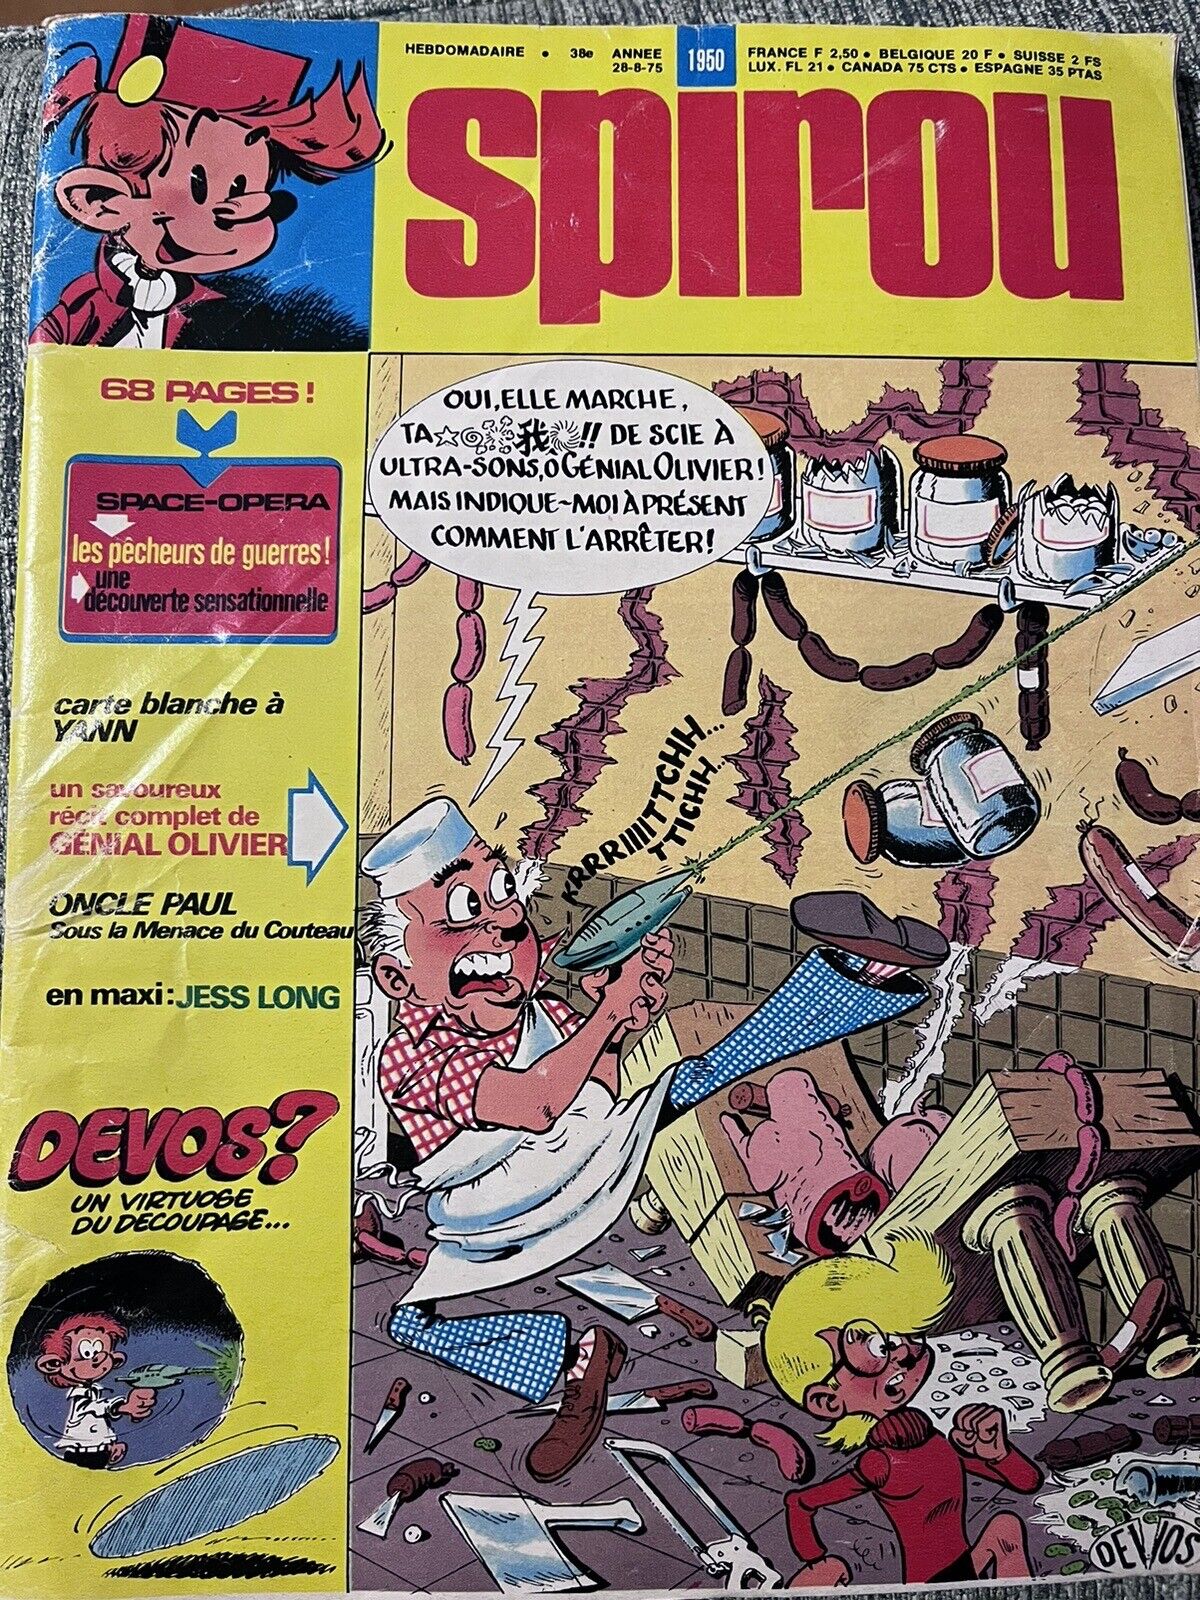 Spirou 1950 68 pp French Comic Good Condition